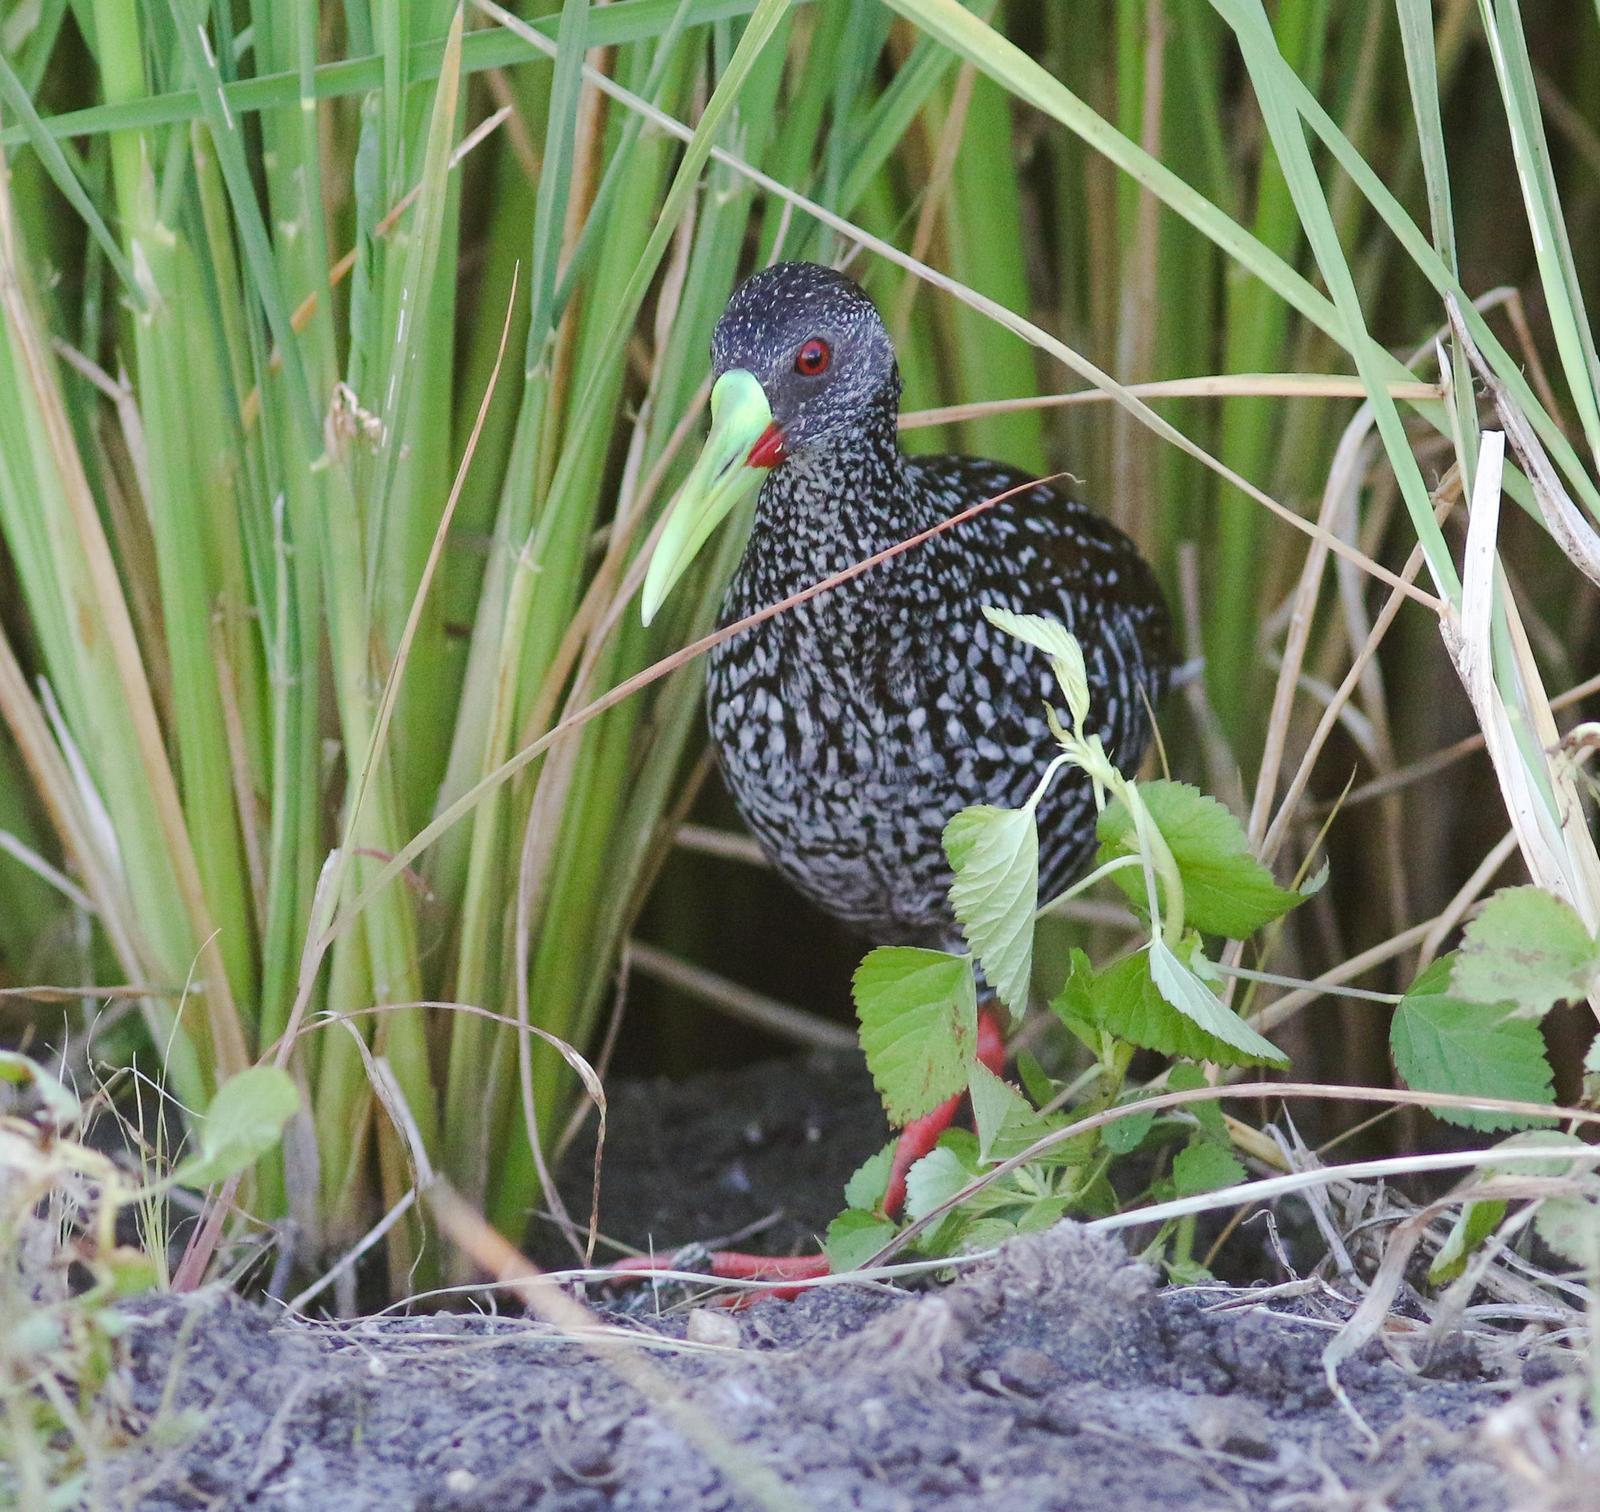 Spotted Rail Photo by Leonardo Garrigues